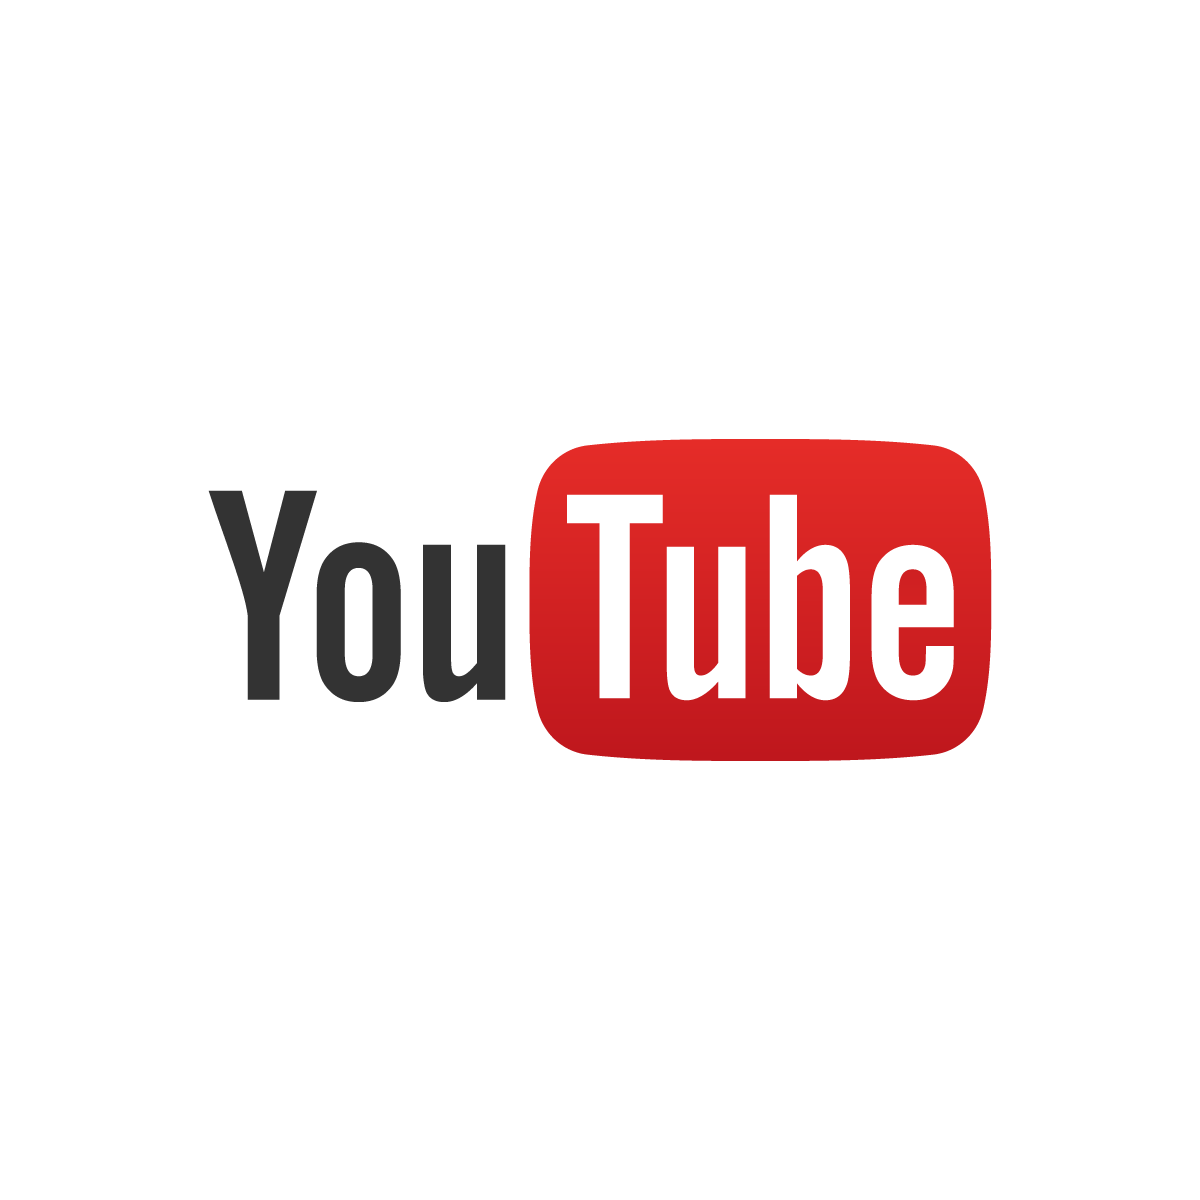 Python tool Pytube downloads from youtube